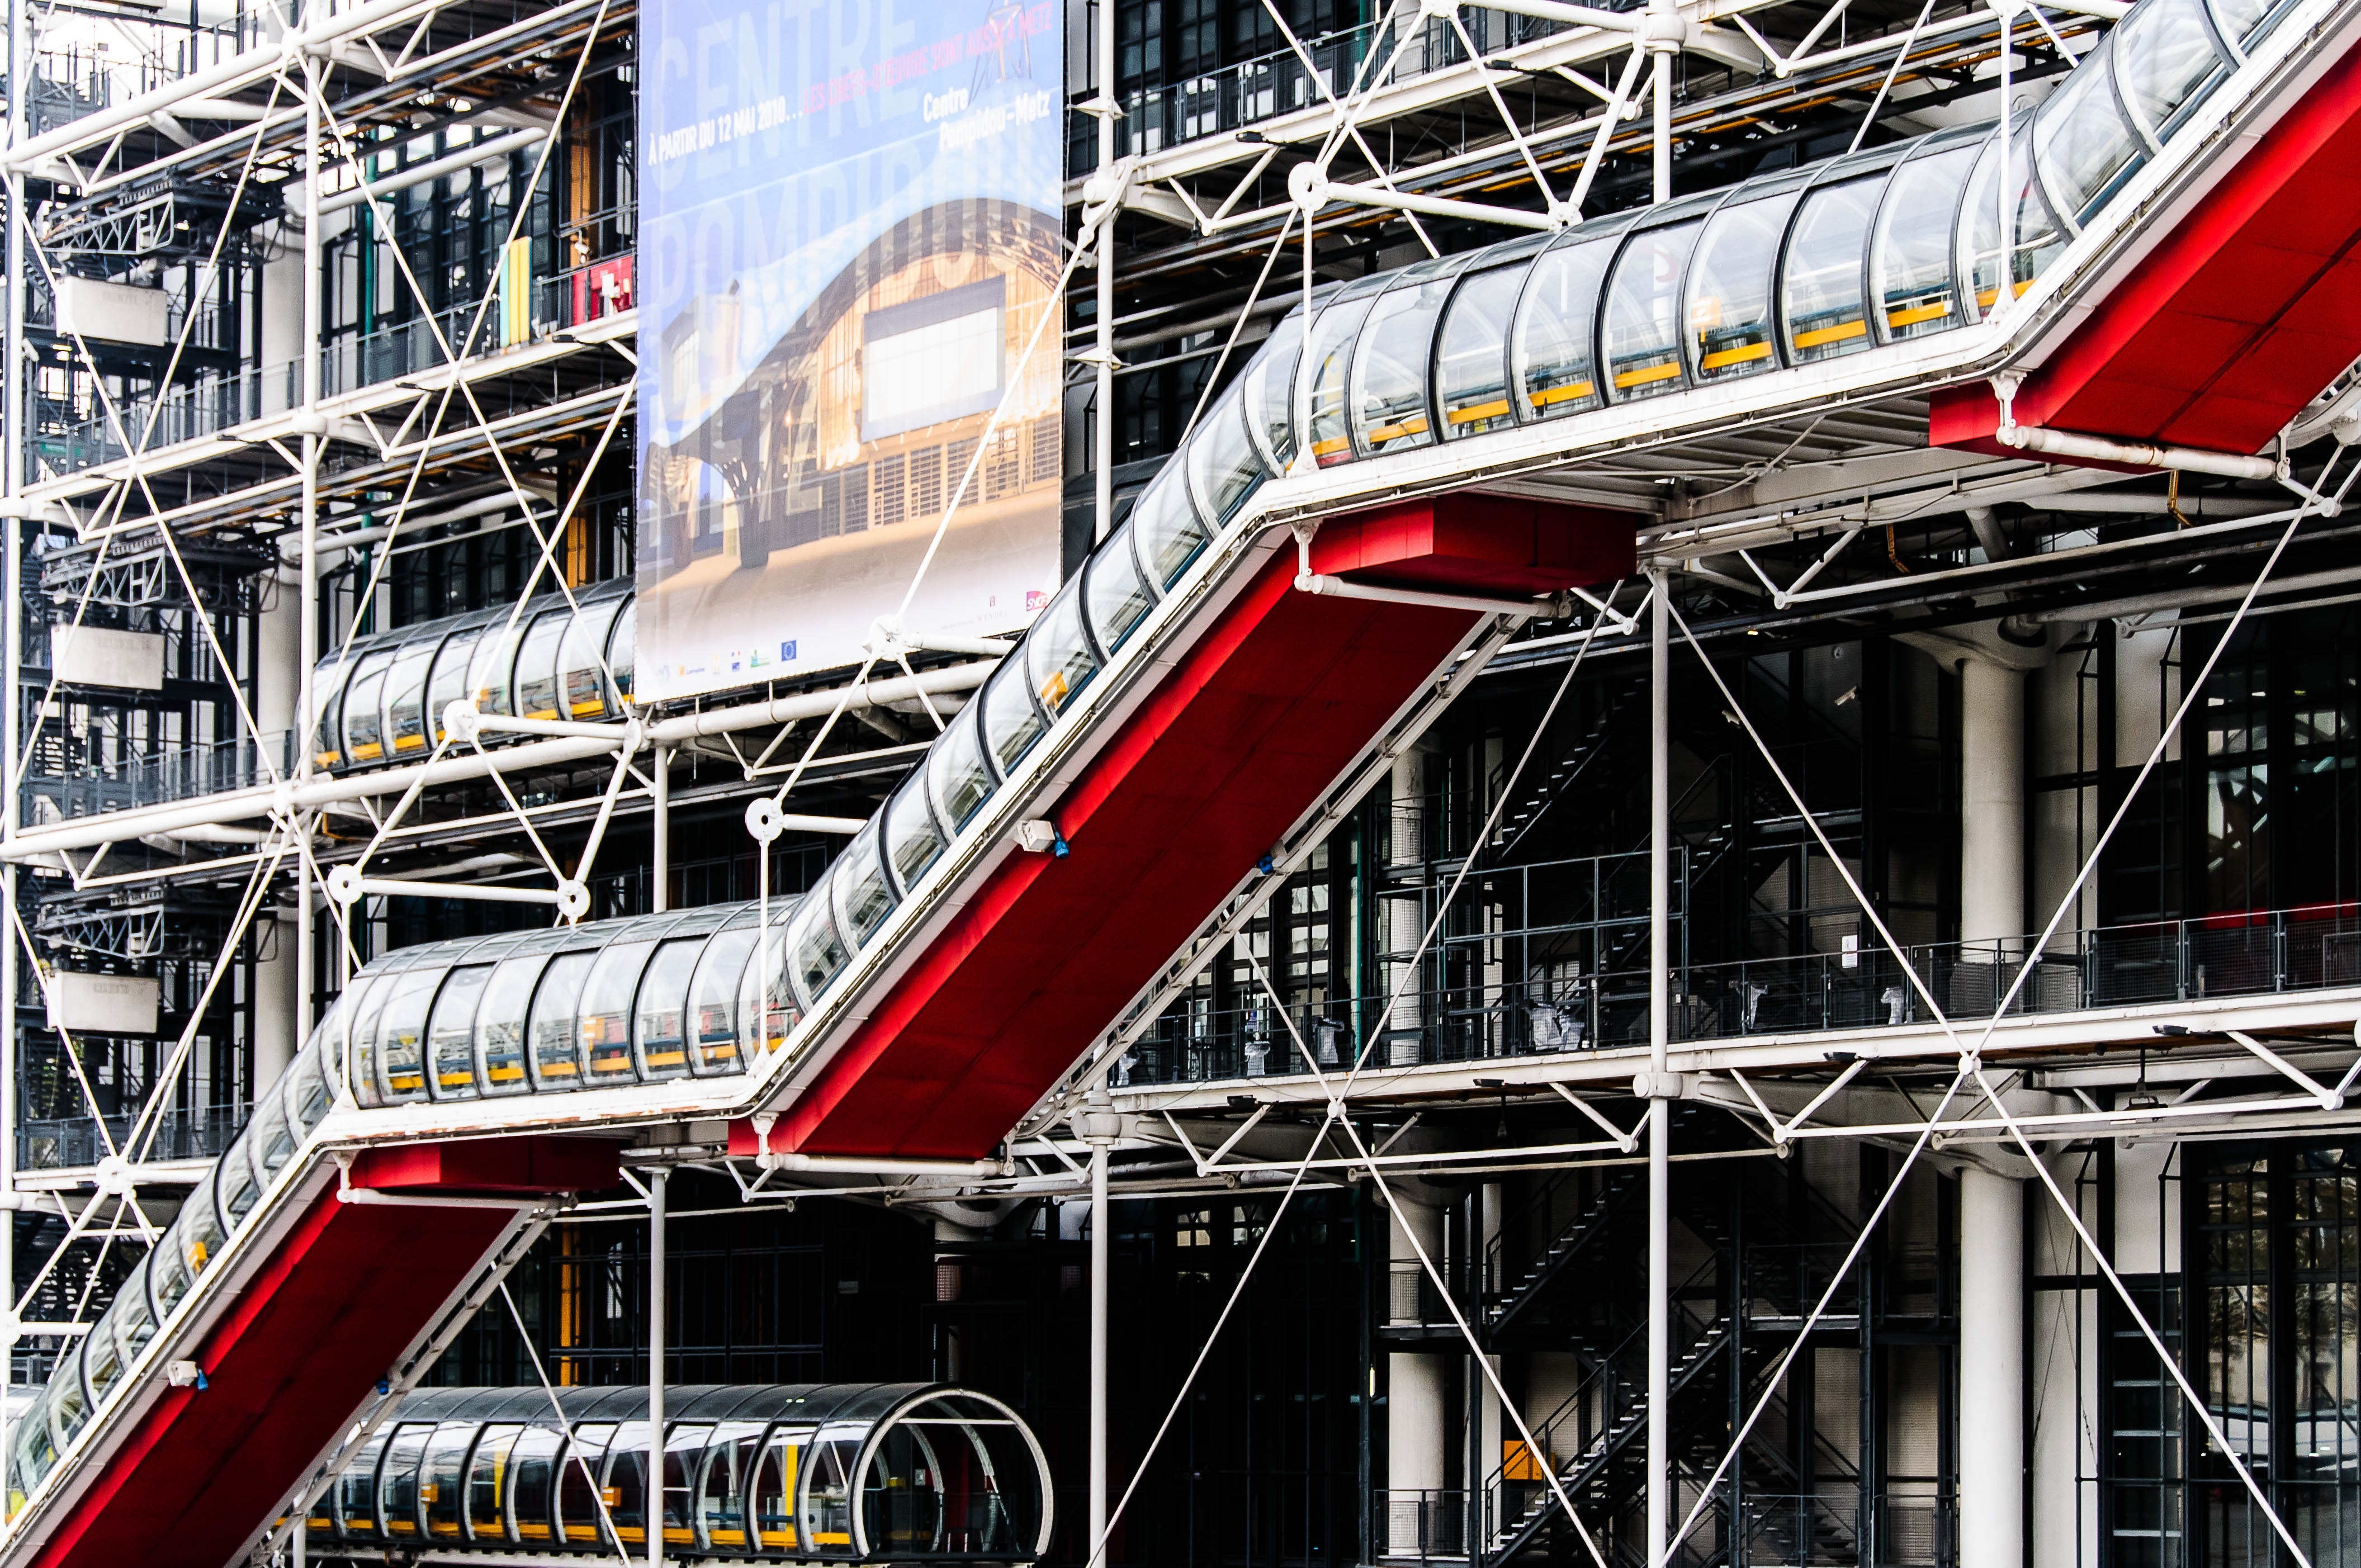 View of Building, Industry, Tubes, Technology, Step, HQ Photo